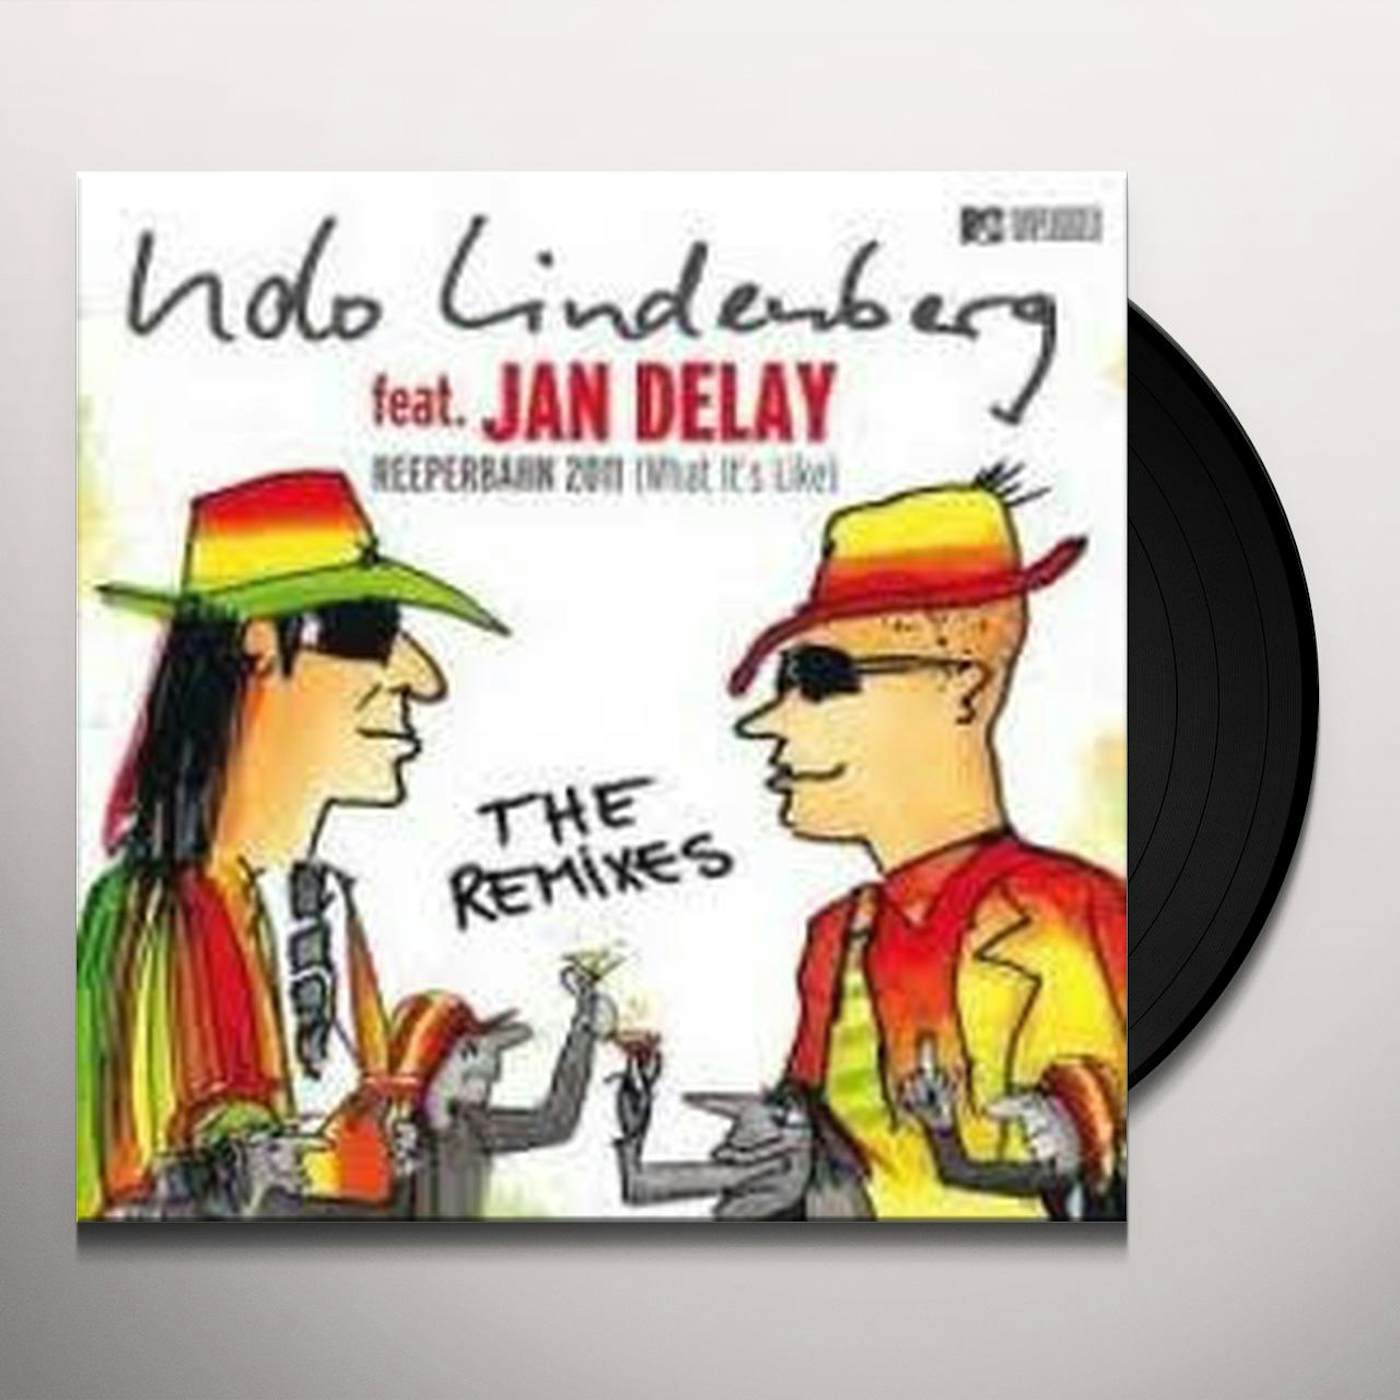 Udo Lindenberg REEPERBAHN 2011 WHAT IT'S LIKE-THE REMIXES Vinyl Record